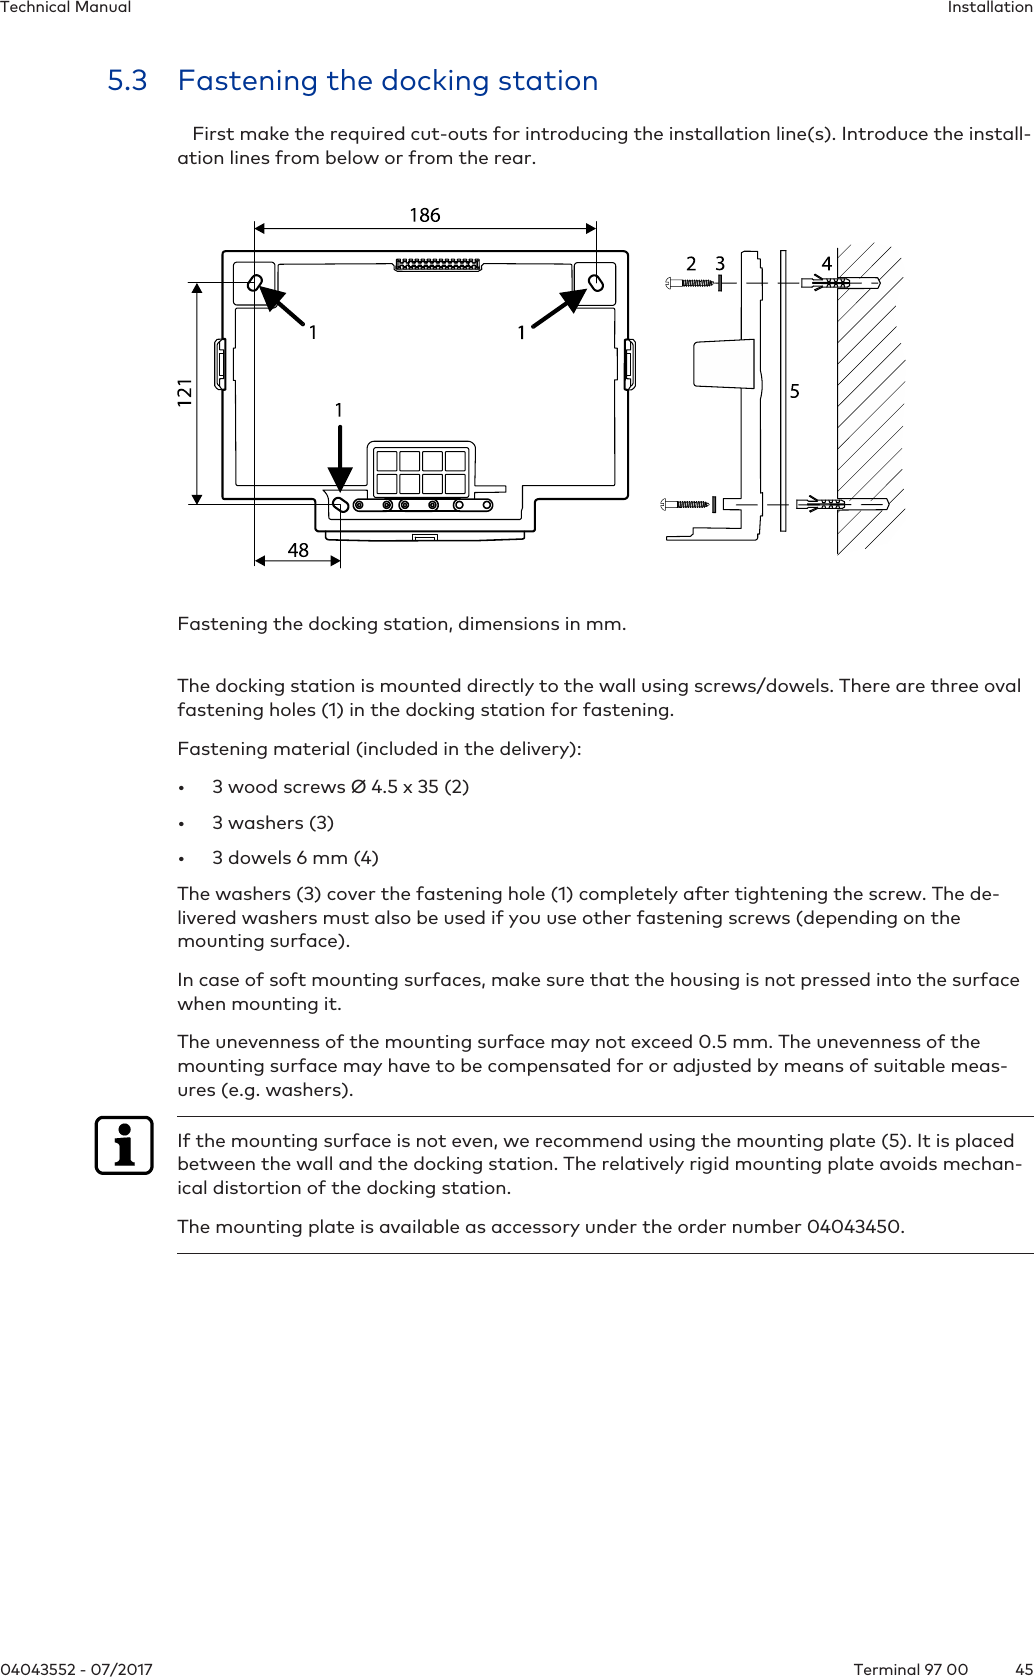 InstallationTechnical Manual4504043552 - 07/2017 Terminal 97 005.3 Fastening the docking station   First make the required cut-outs for introducing the installation line(s). Introduce the install-ation lines from below or from the rear.Fastening the docking station, dimensions in mm. The docking station is mounted directly to the wall using screws/dowels. There are three ovalfastening holes(1) in the docking station for fastening.Fastening material (included in the delivery):• 3 wood screws Ø 4.5 x 35 (2)• 3 washers (3)• 3 dowels 6 mm (4)The washers (3) cover the fastening hole (1) completely after tightening the screw. The de-livered washers must also be used if you use other fastening screws (depending on themounting surface).In case of soft mounting surfaces, make sure that the housing is not pressed into the surfacewhen mounting it.The unevenness of the mounting surface may not exceed 0.5 mm. The unevenness of themounting surface may have to be compensated for or adjusted by means of suitable meas-ures (e.g. washers).If the mounting surface is not even, we recommend using the mounting plate (5). It is placedbetween the wall and the docking station. The relatively rigid mounting plate avoids mechan-ical distortion of the docking station.The mounting plate is available as accessory under the order number 04043450.